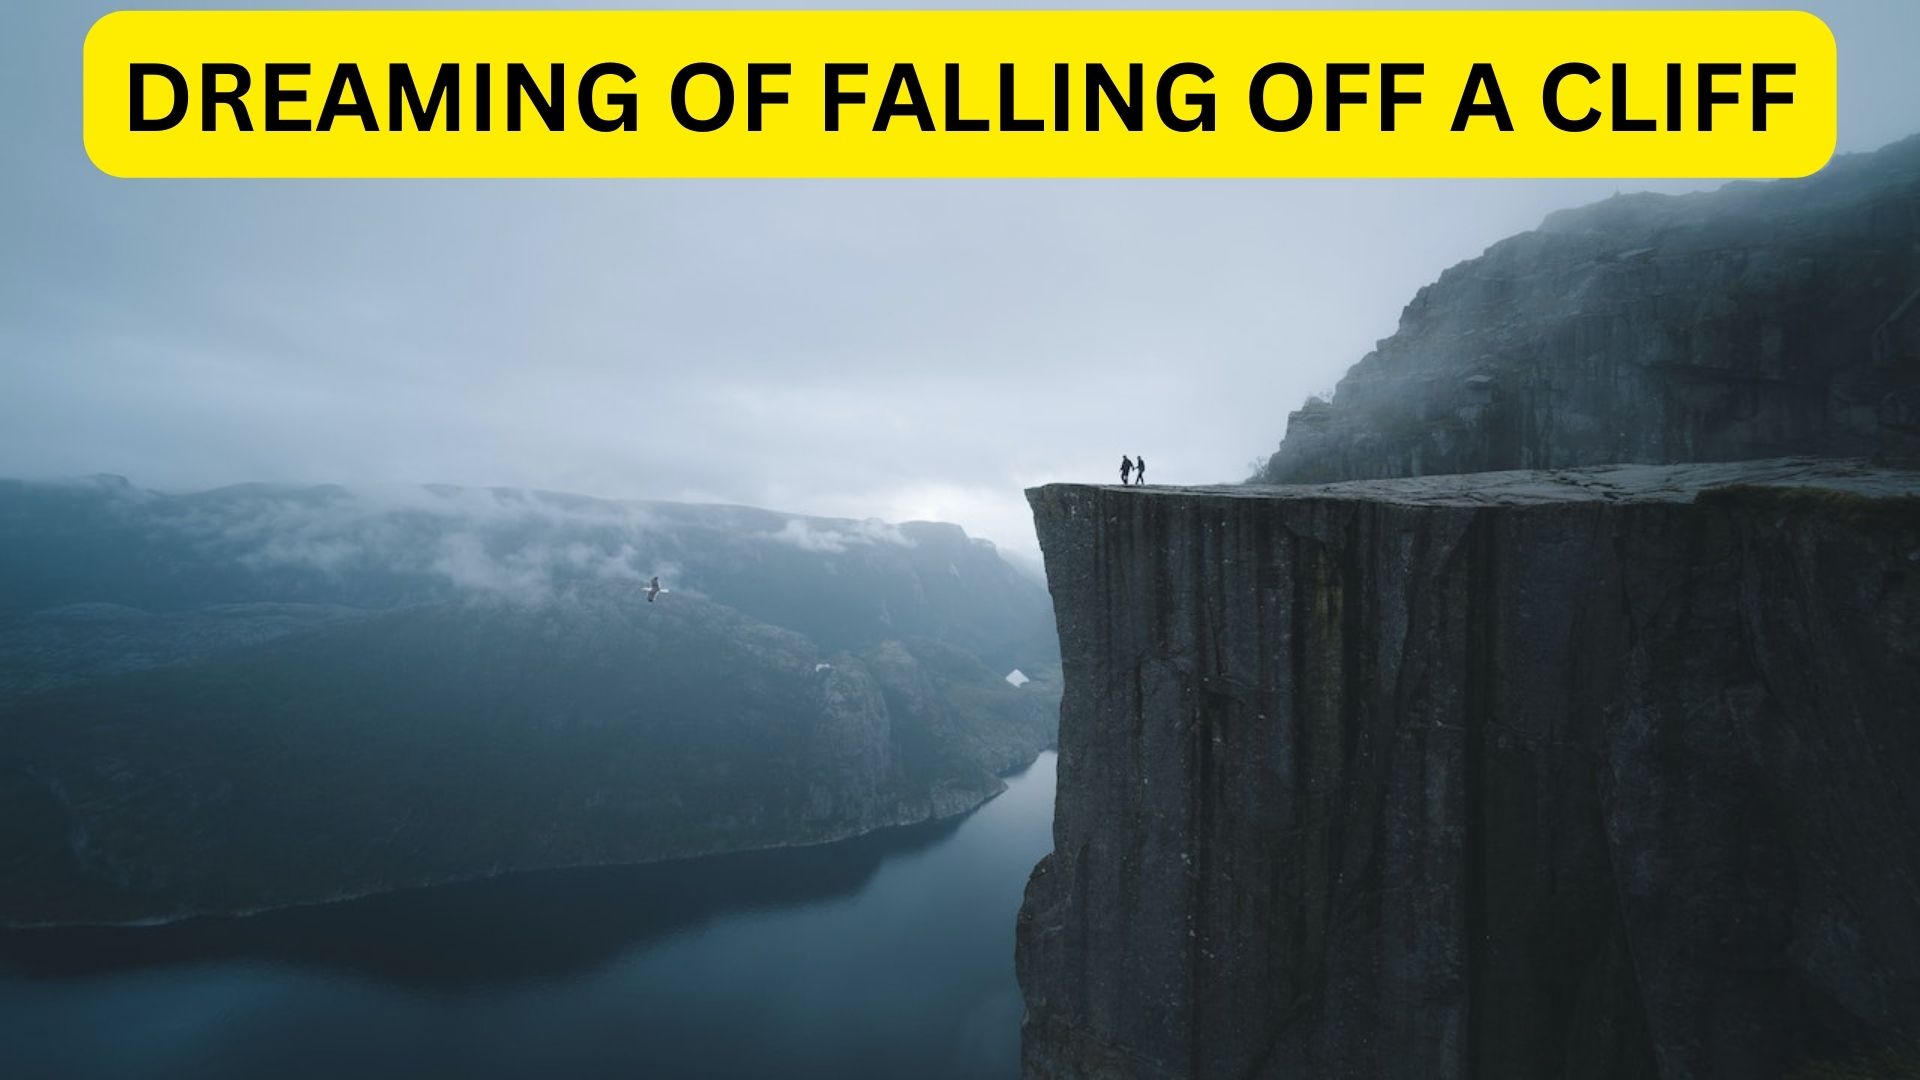 Dreaming Of Falling Off A Cliff - Represents A Forced Change